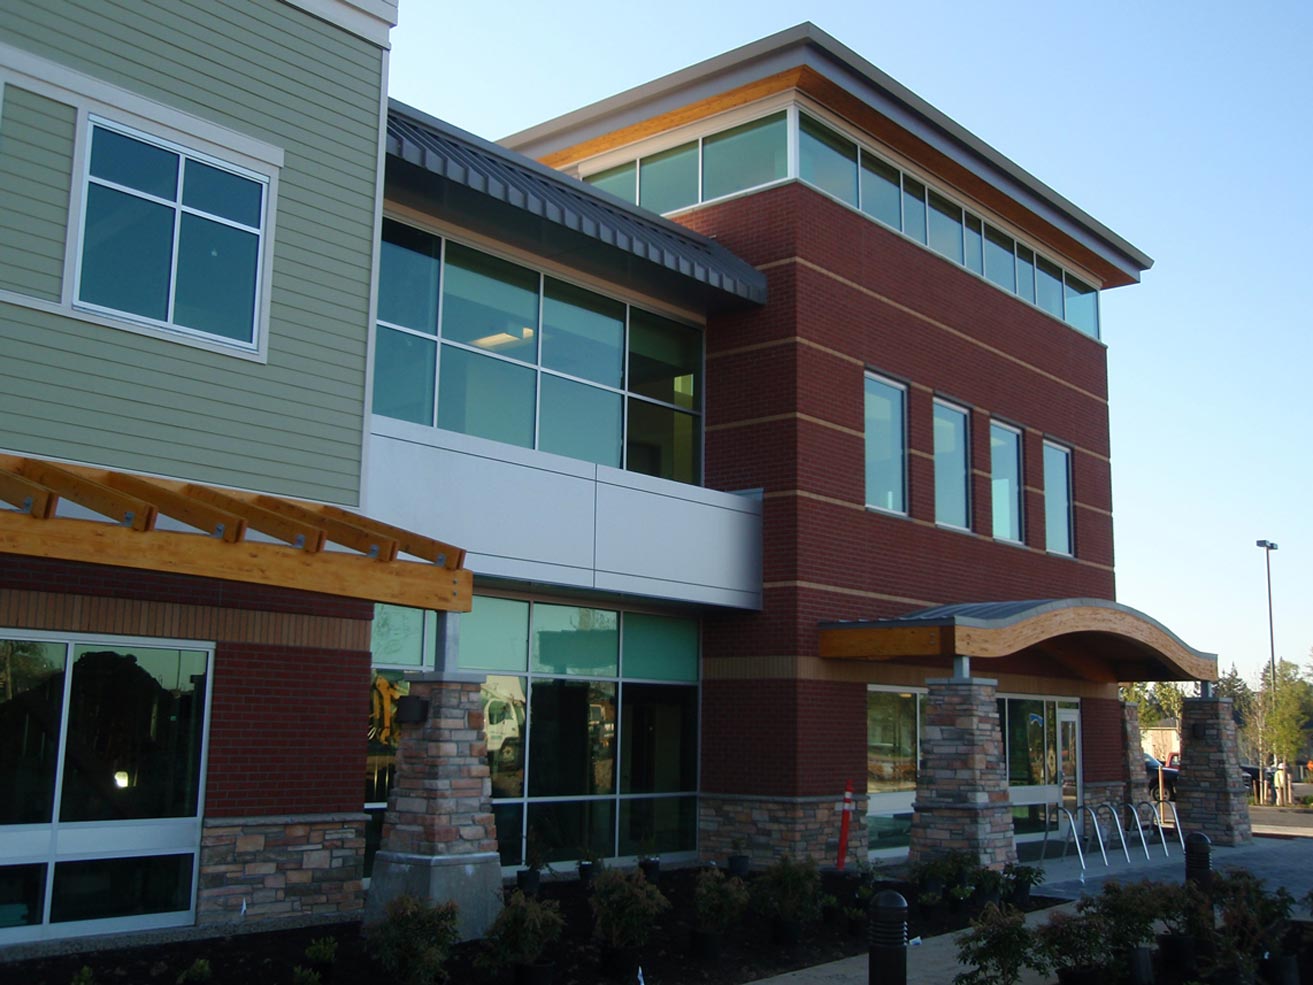 Two-Story Commercial Building Designs